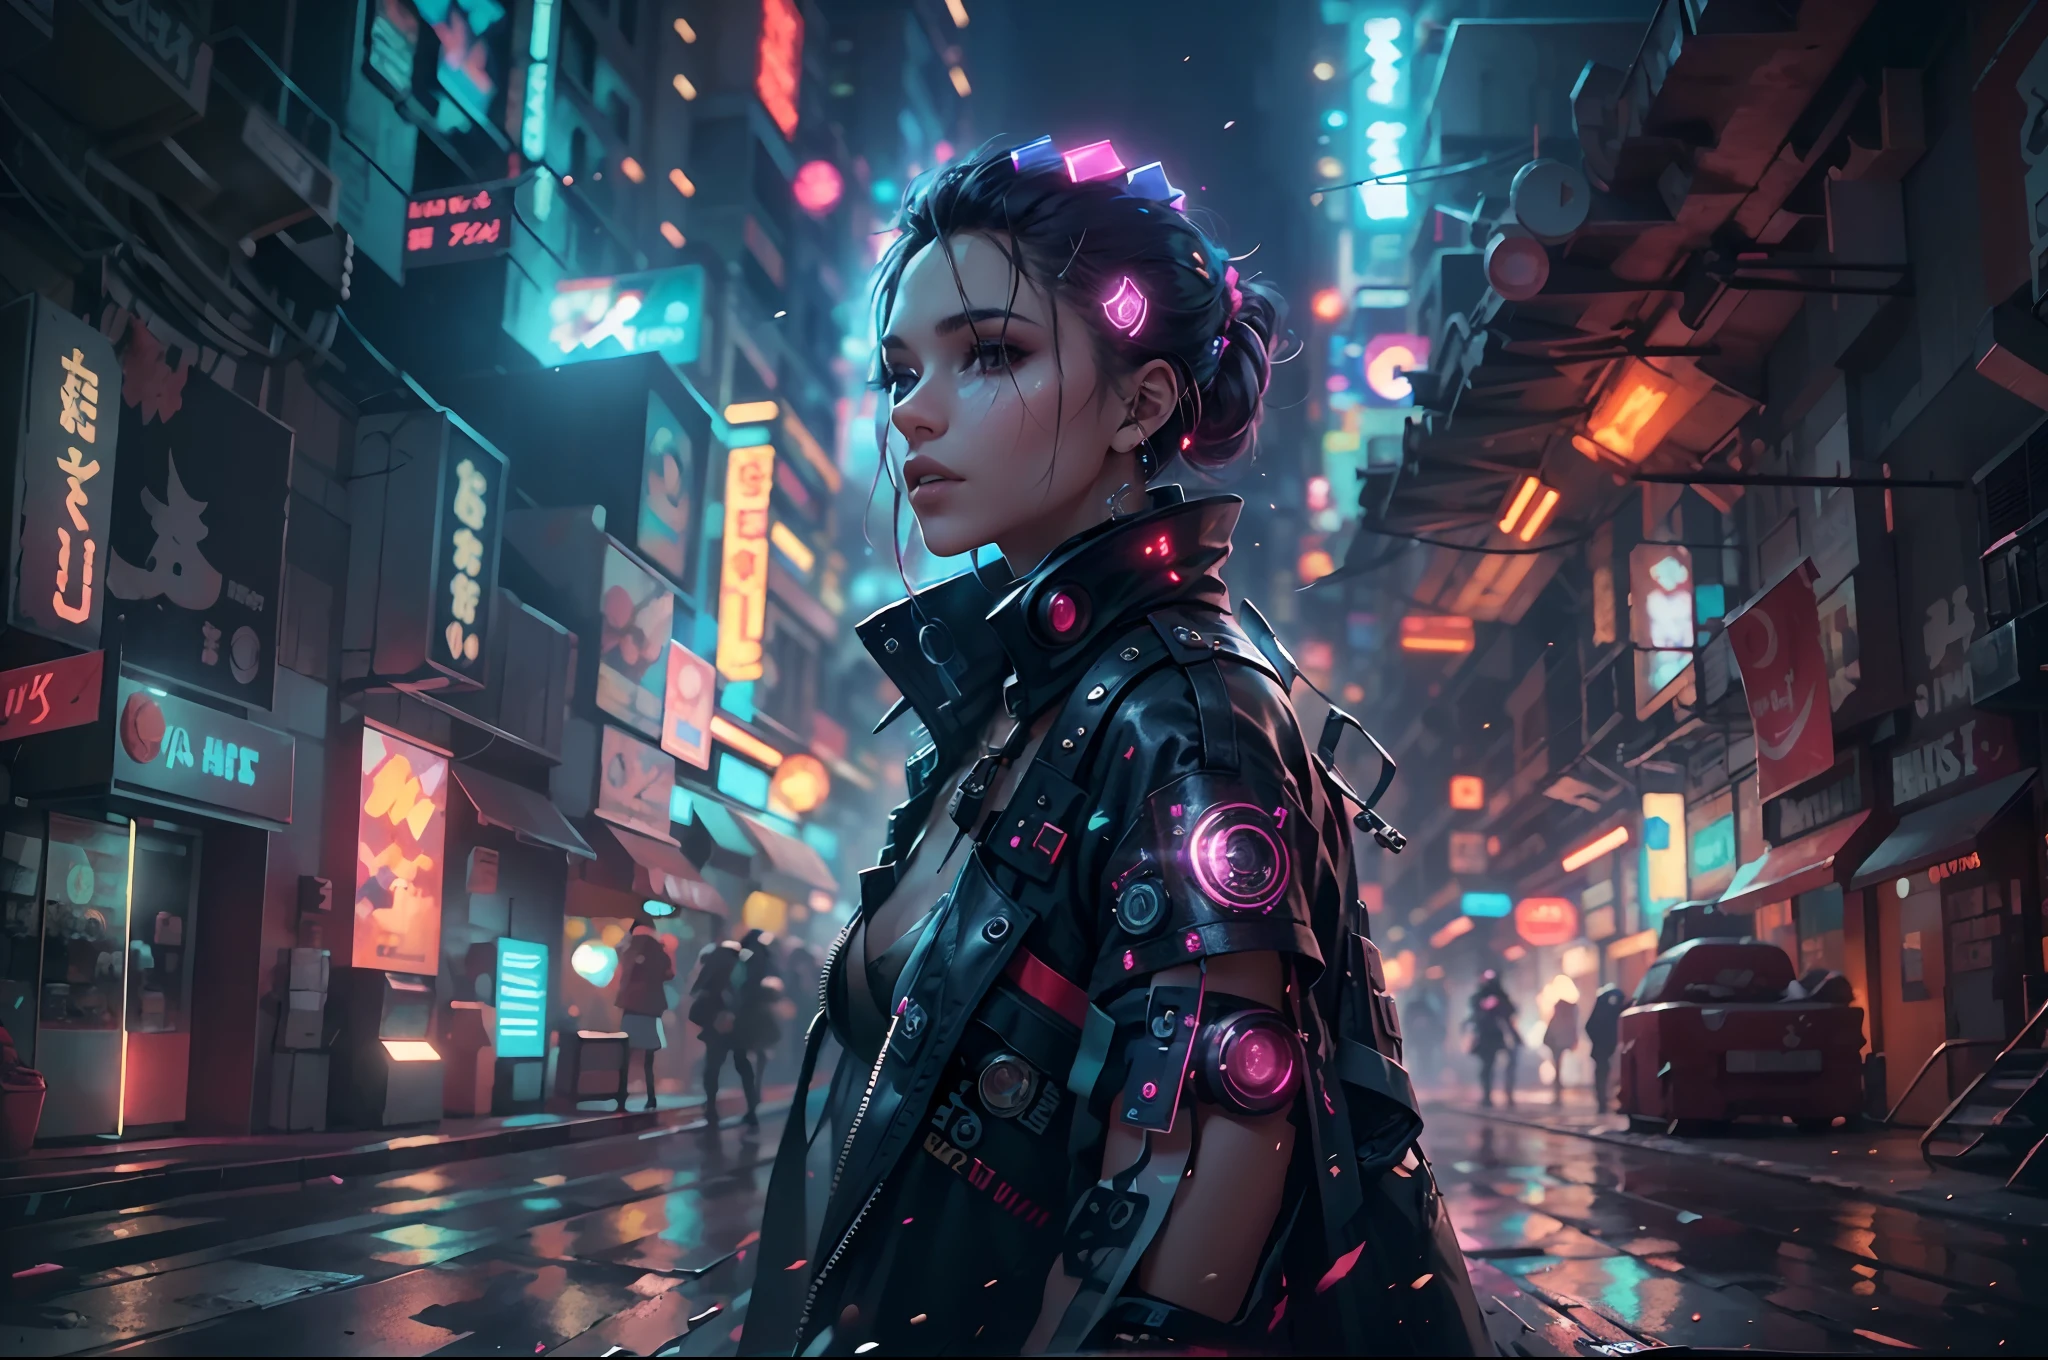 Walking through the dark and oppressive streets of a cyberpunk city, stunning beauty, a young woman full of charm and mystery, dressed in clothes perfectly suited to the futuristic setting, hair shines in vivid and irreverent tones, adorned by futuristic and technological embellishments, perfect clothes of aesthetics and functionality, mixture of sparkles and textures that capture the light in a mesmerizing way. The environment around him seems to light up and come to life, as if it had been transformed by his presence, walking with confidence and gracefulness through the streets, epic scene,